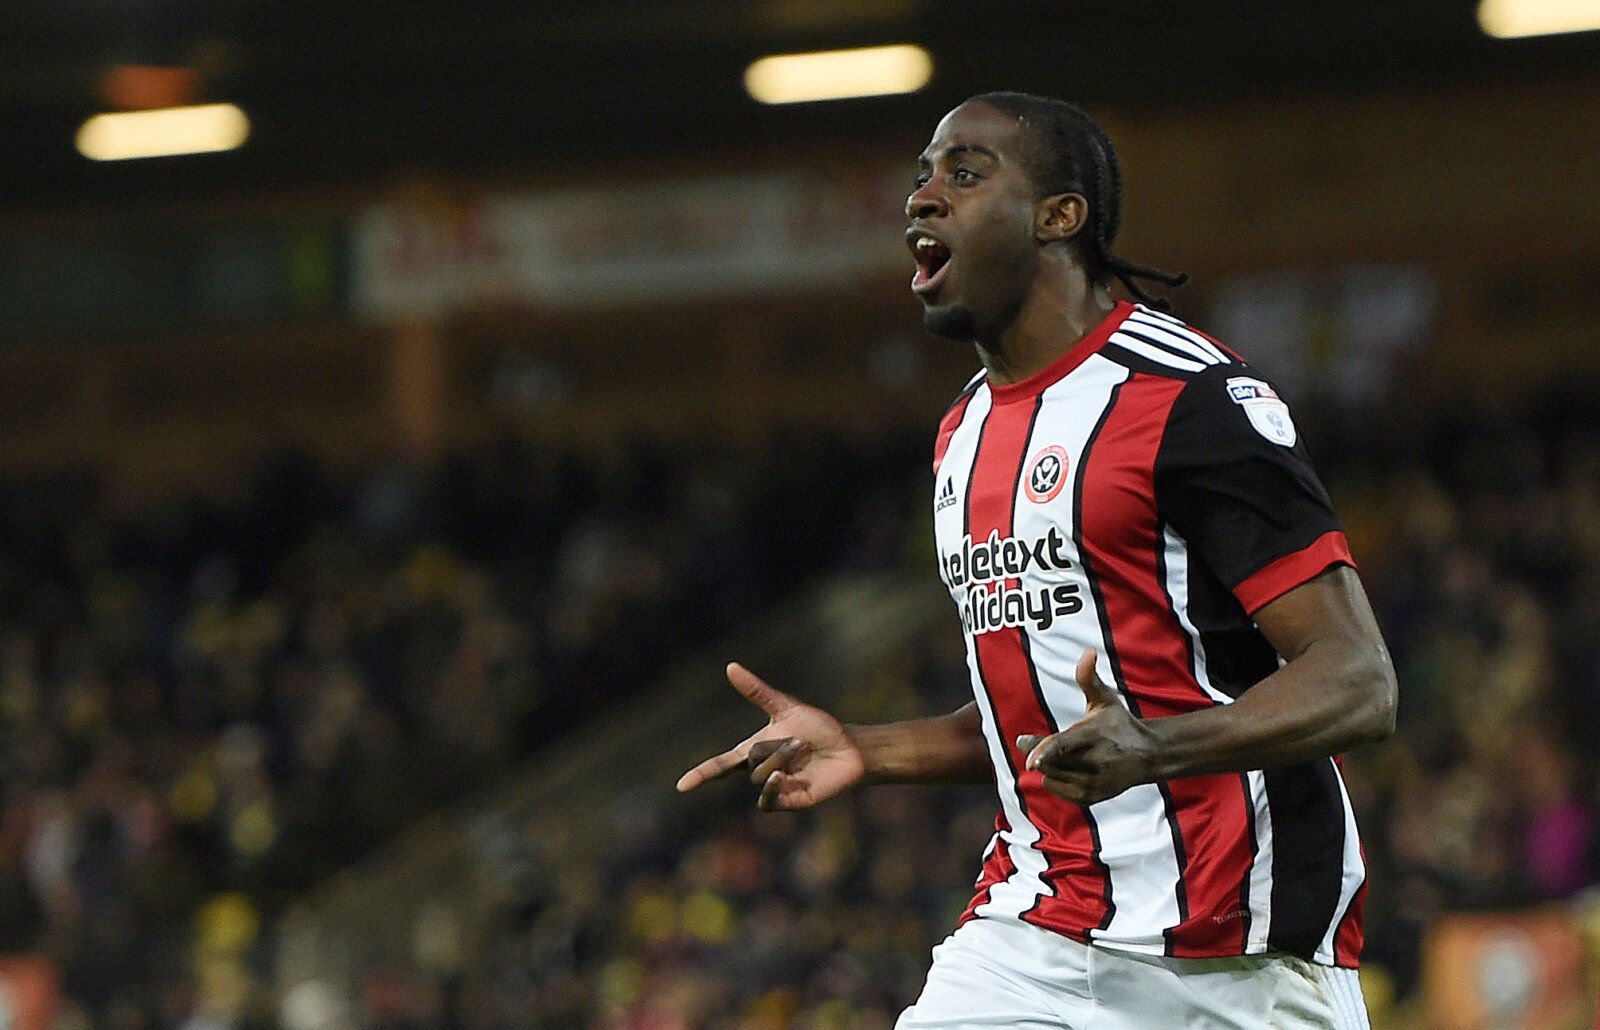 Soccer Football - Championship - Norwich City vs Sheffield United - Carrow Road, Norwich, Britain - January 20, 2018  Sheffield United's Clayton Donaldson celebrates scoring their second goal   Action Images/Alan Walter  EDITORIAL USE ONLY. No use with unauthorized audio, video, data, fixture lists, club/league logos or 